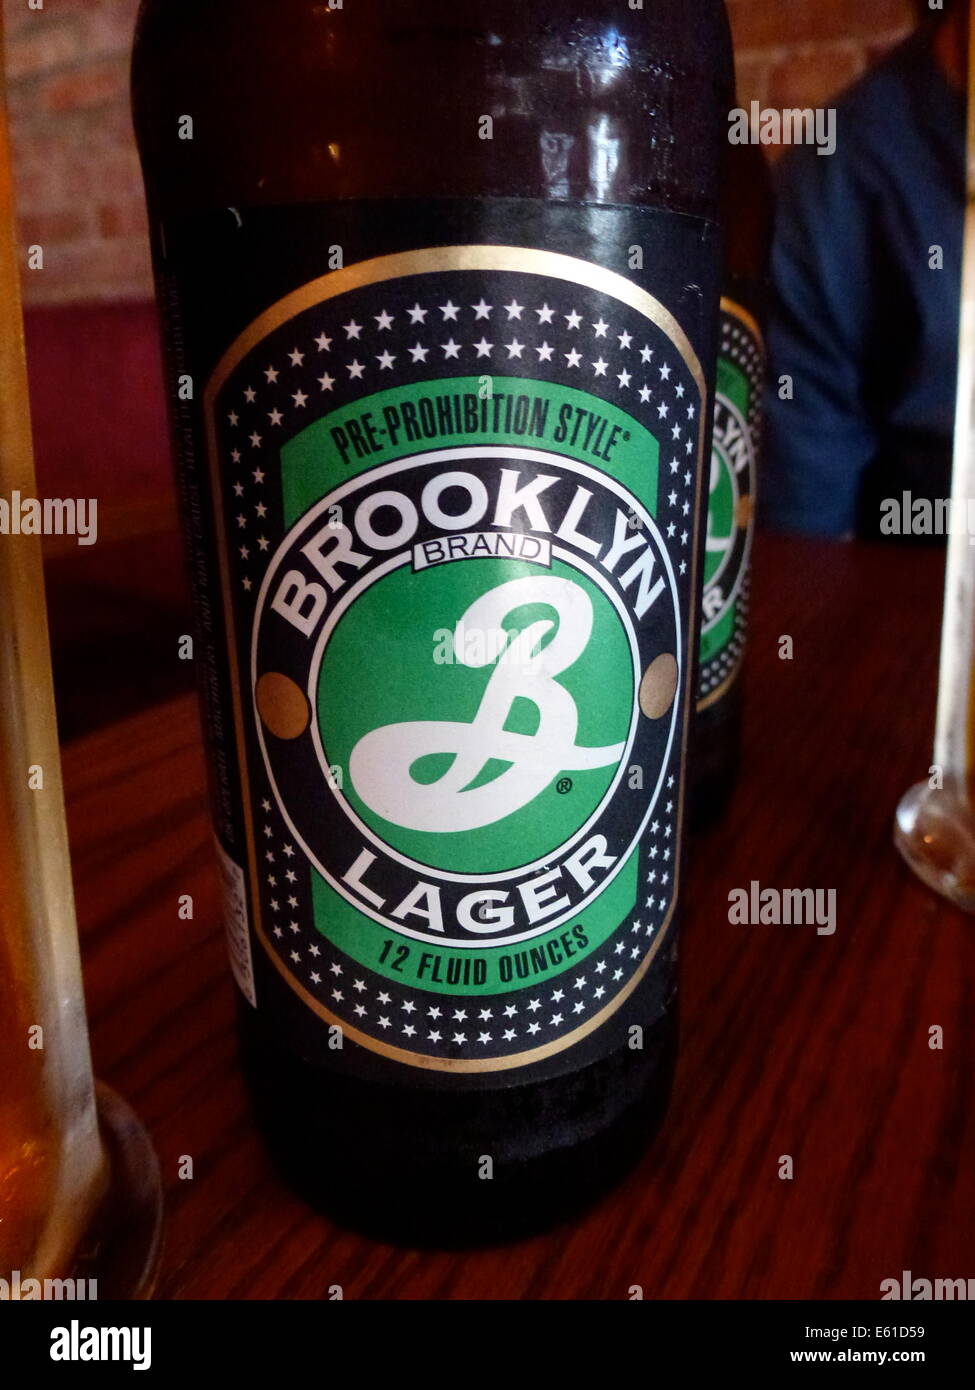 A beer bottle with Brooklyn Lager Beer of the Brooklyn Brewery in New York, USA, 24 June 2014. The logo of the brewery was designed by Milton Glaser, who also designed the 'I love NY' logo. Photo: Alexandra Schuler/dpa - ATTENTION! NO WIRE SERVICE - Stock Photo